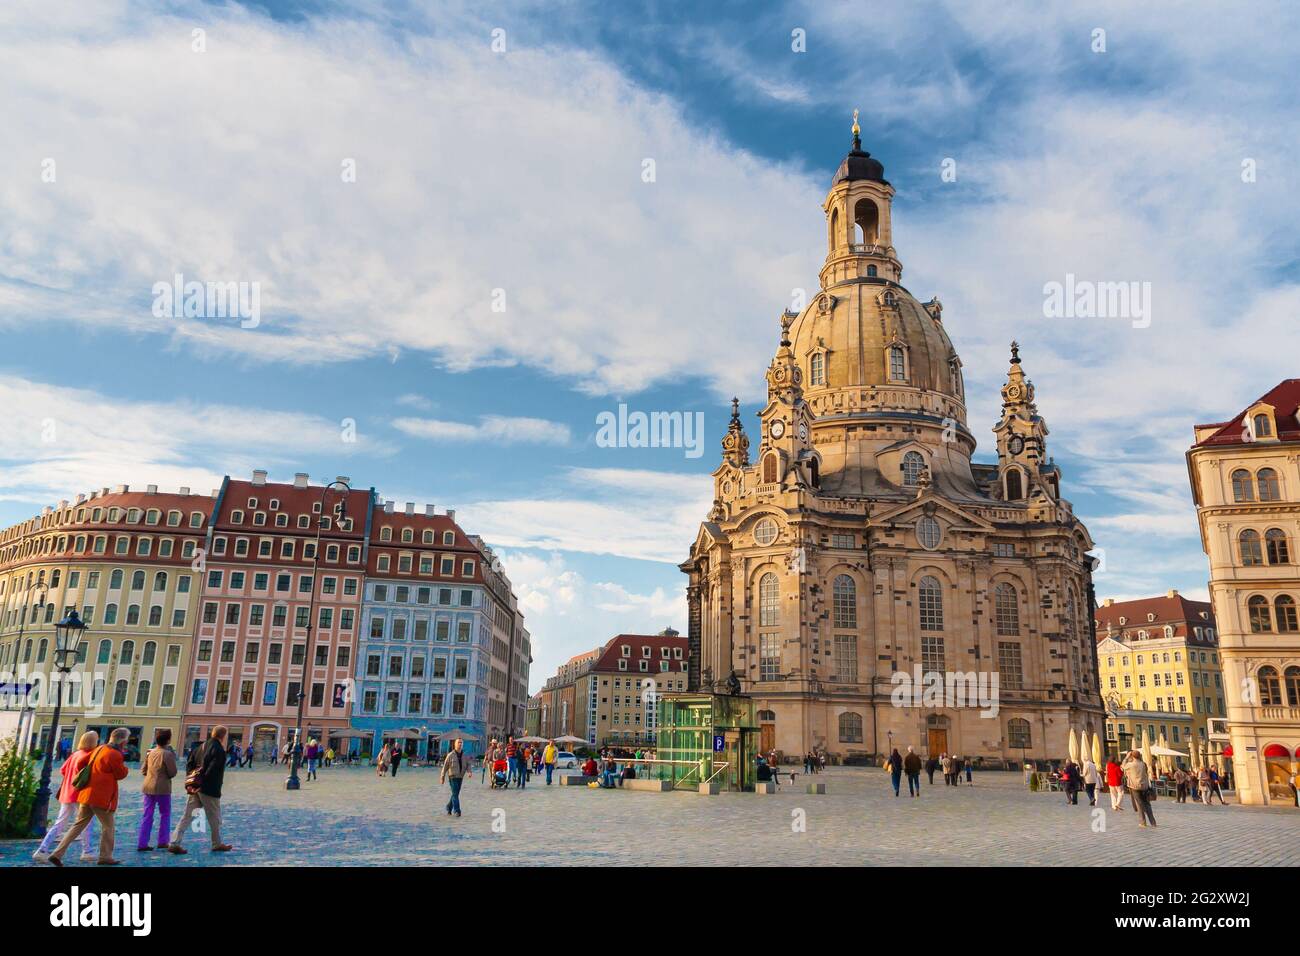 Dresden, Germany - May 24, 2010: rebuild 'Frauenkirche' - German for 'church of our lady' at the 'Neumarkt' which means 'New Market' in Dresden Stock Photo